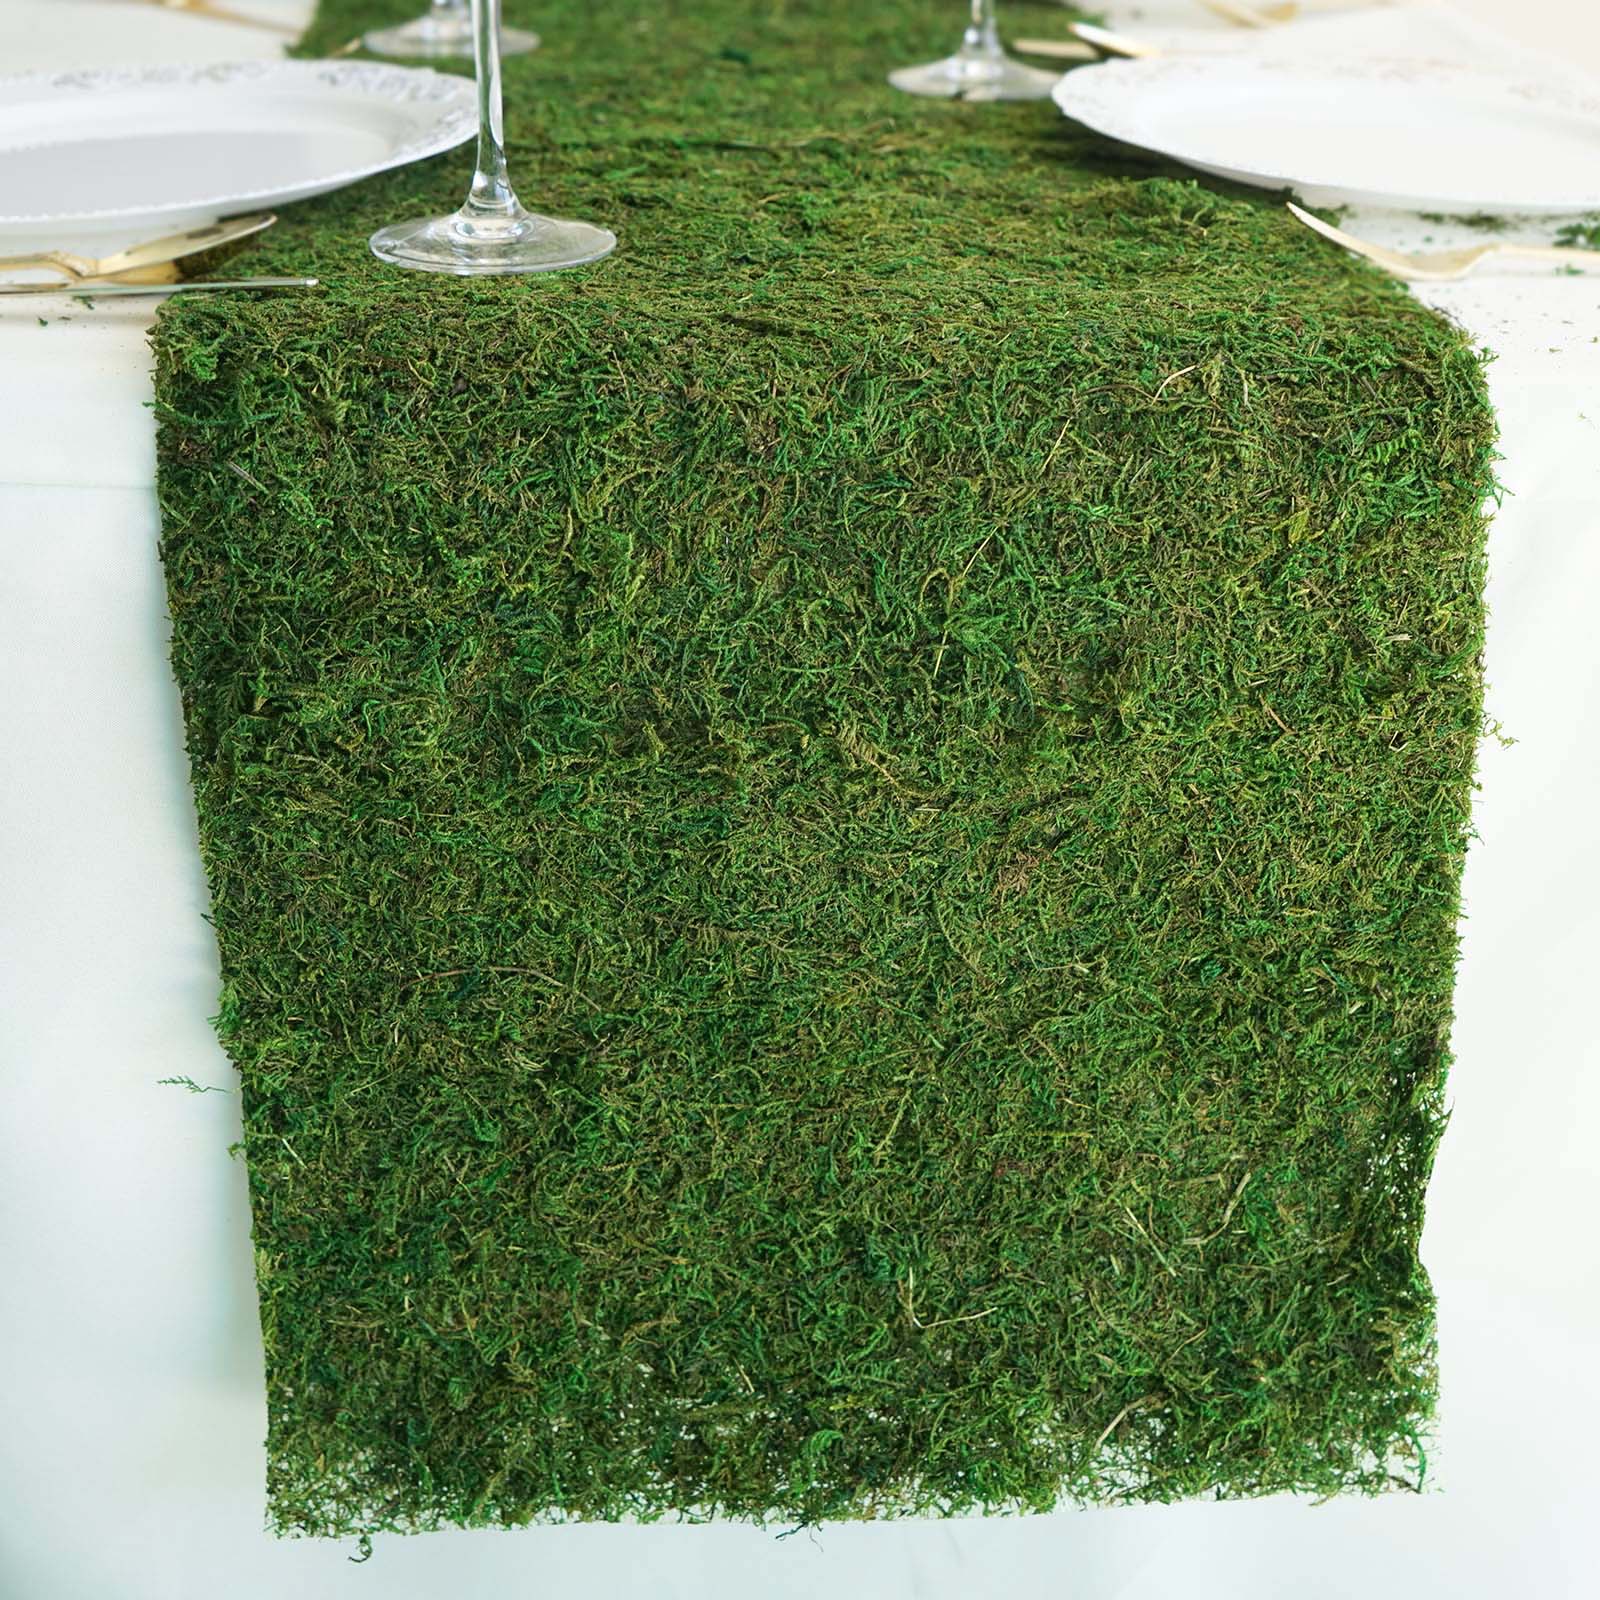 Buy 14x48 Green Preserved Moss Table Runner with Fishnet Grid - Pack of 1 Moss  Runner at Tablecloth Factory